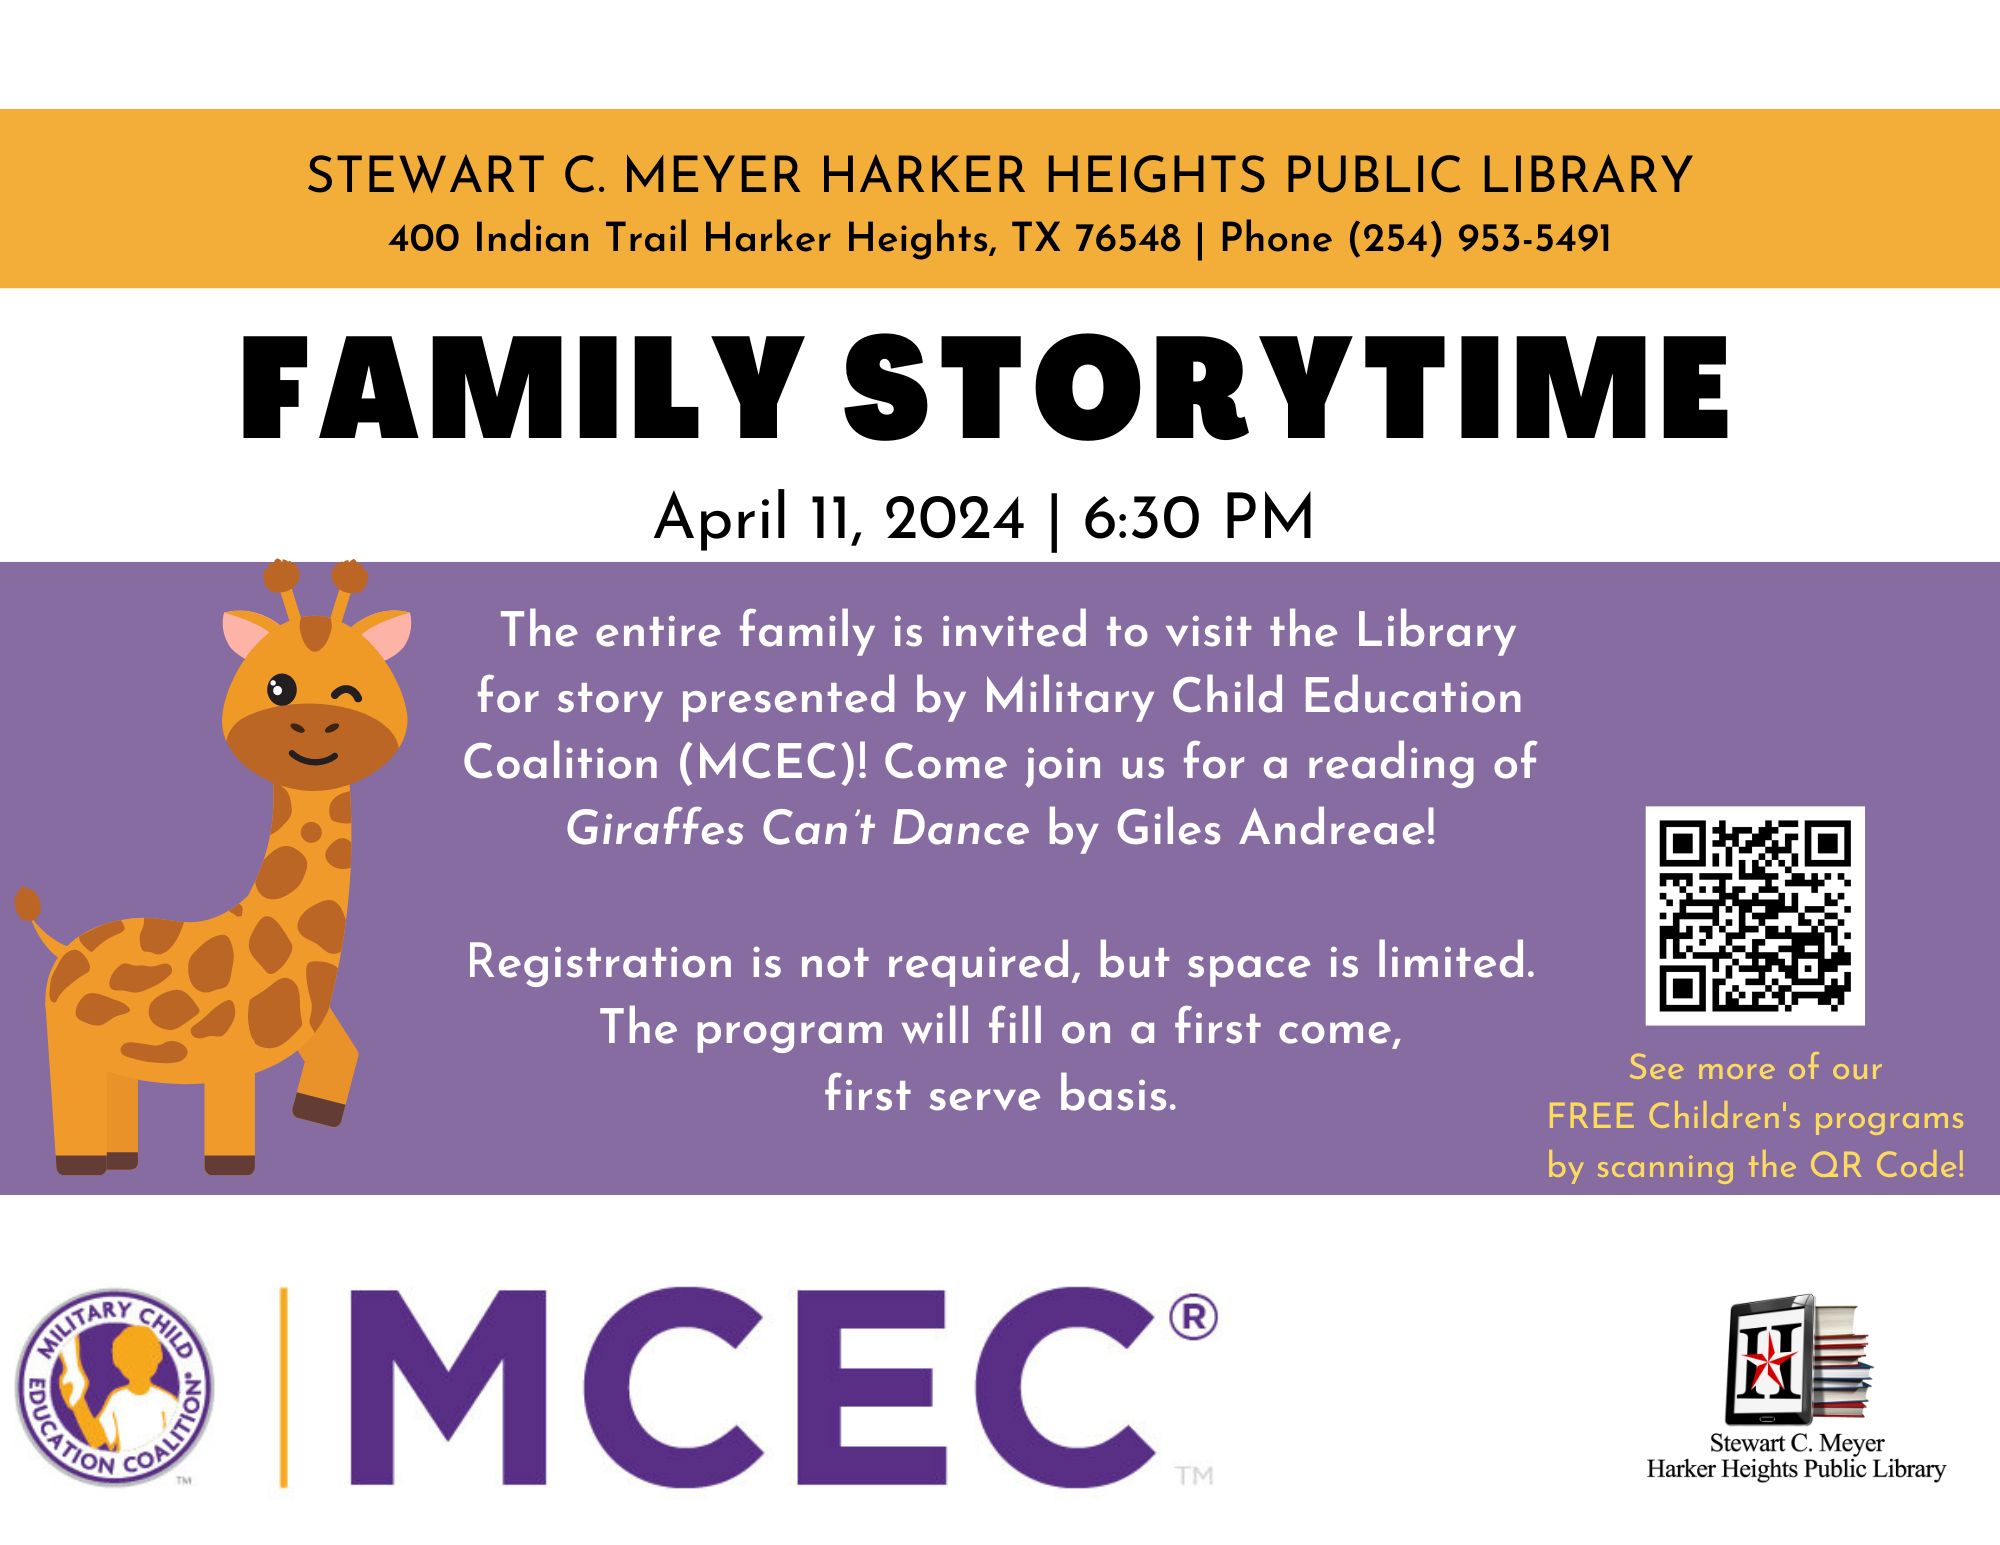 MCEC Storytime at the Library April 11 2024 at 6:30 PM